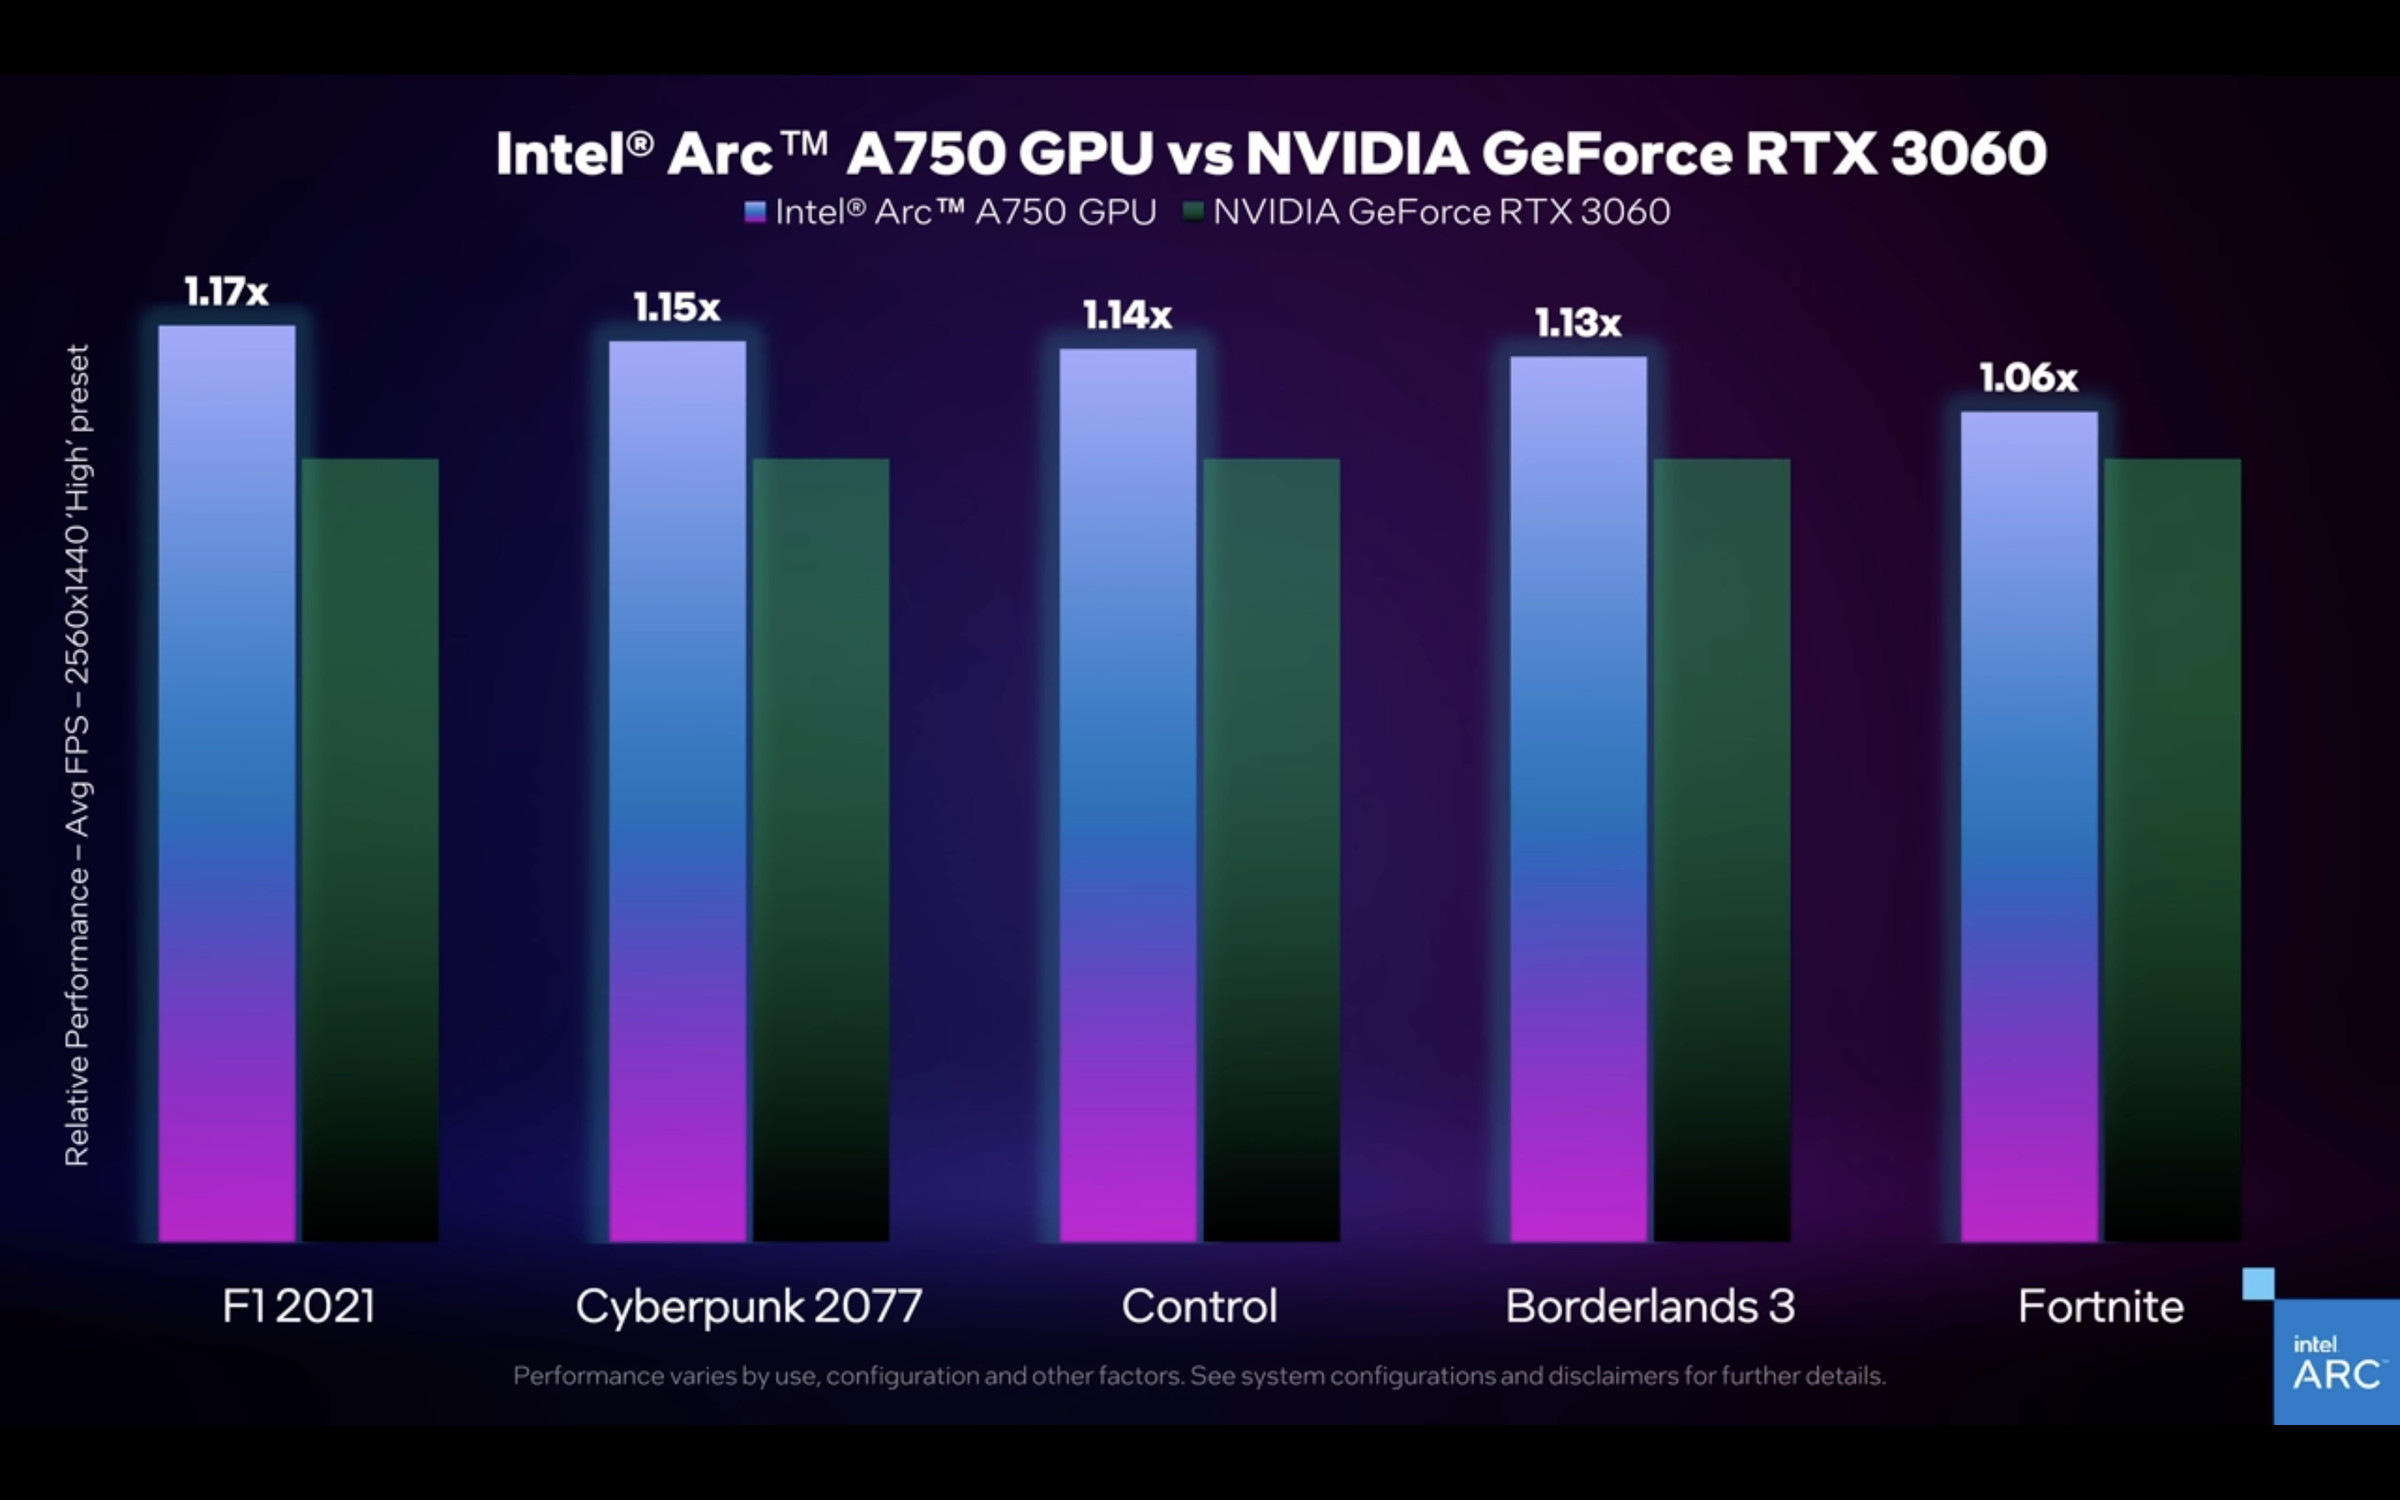 Intel’s Arc A750 performs 1.06 to 1.15 times better than the standard RTX 3060.